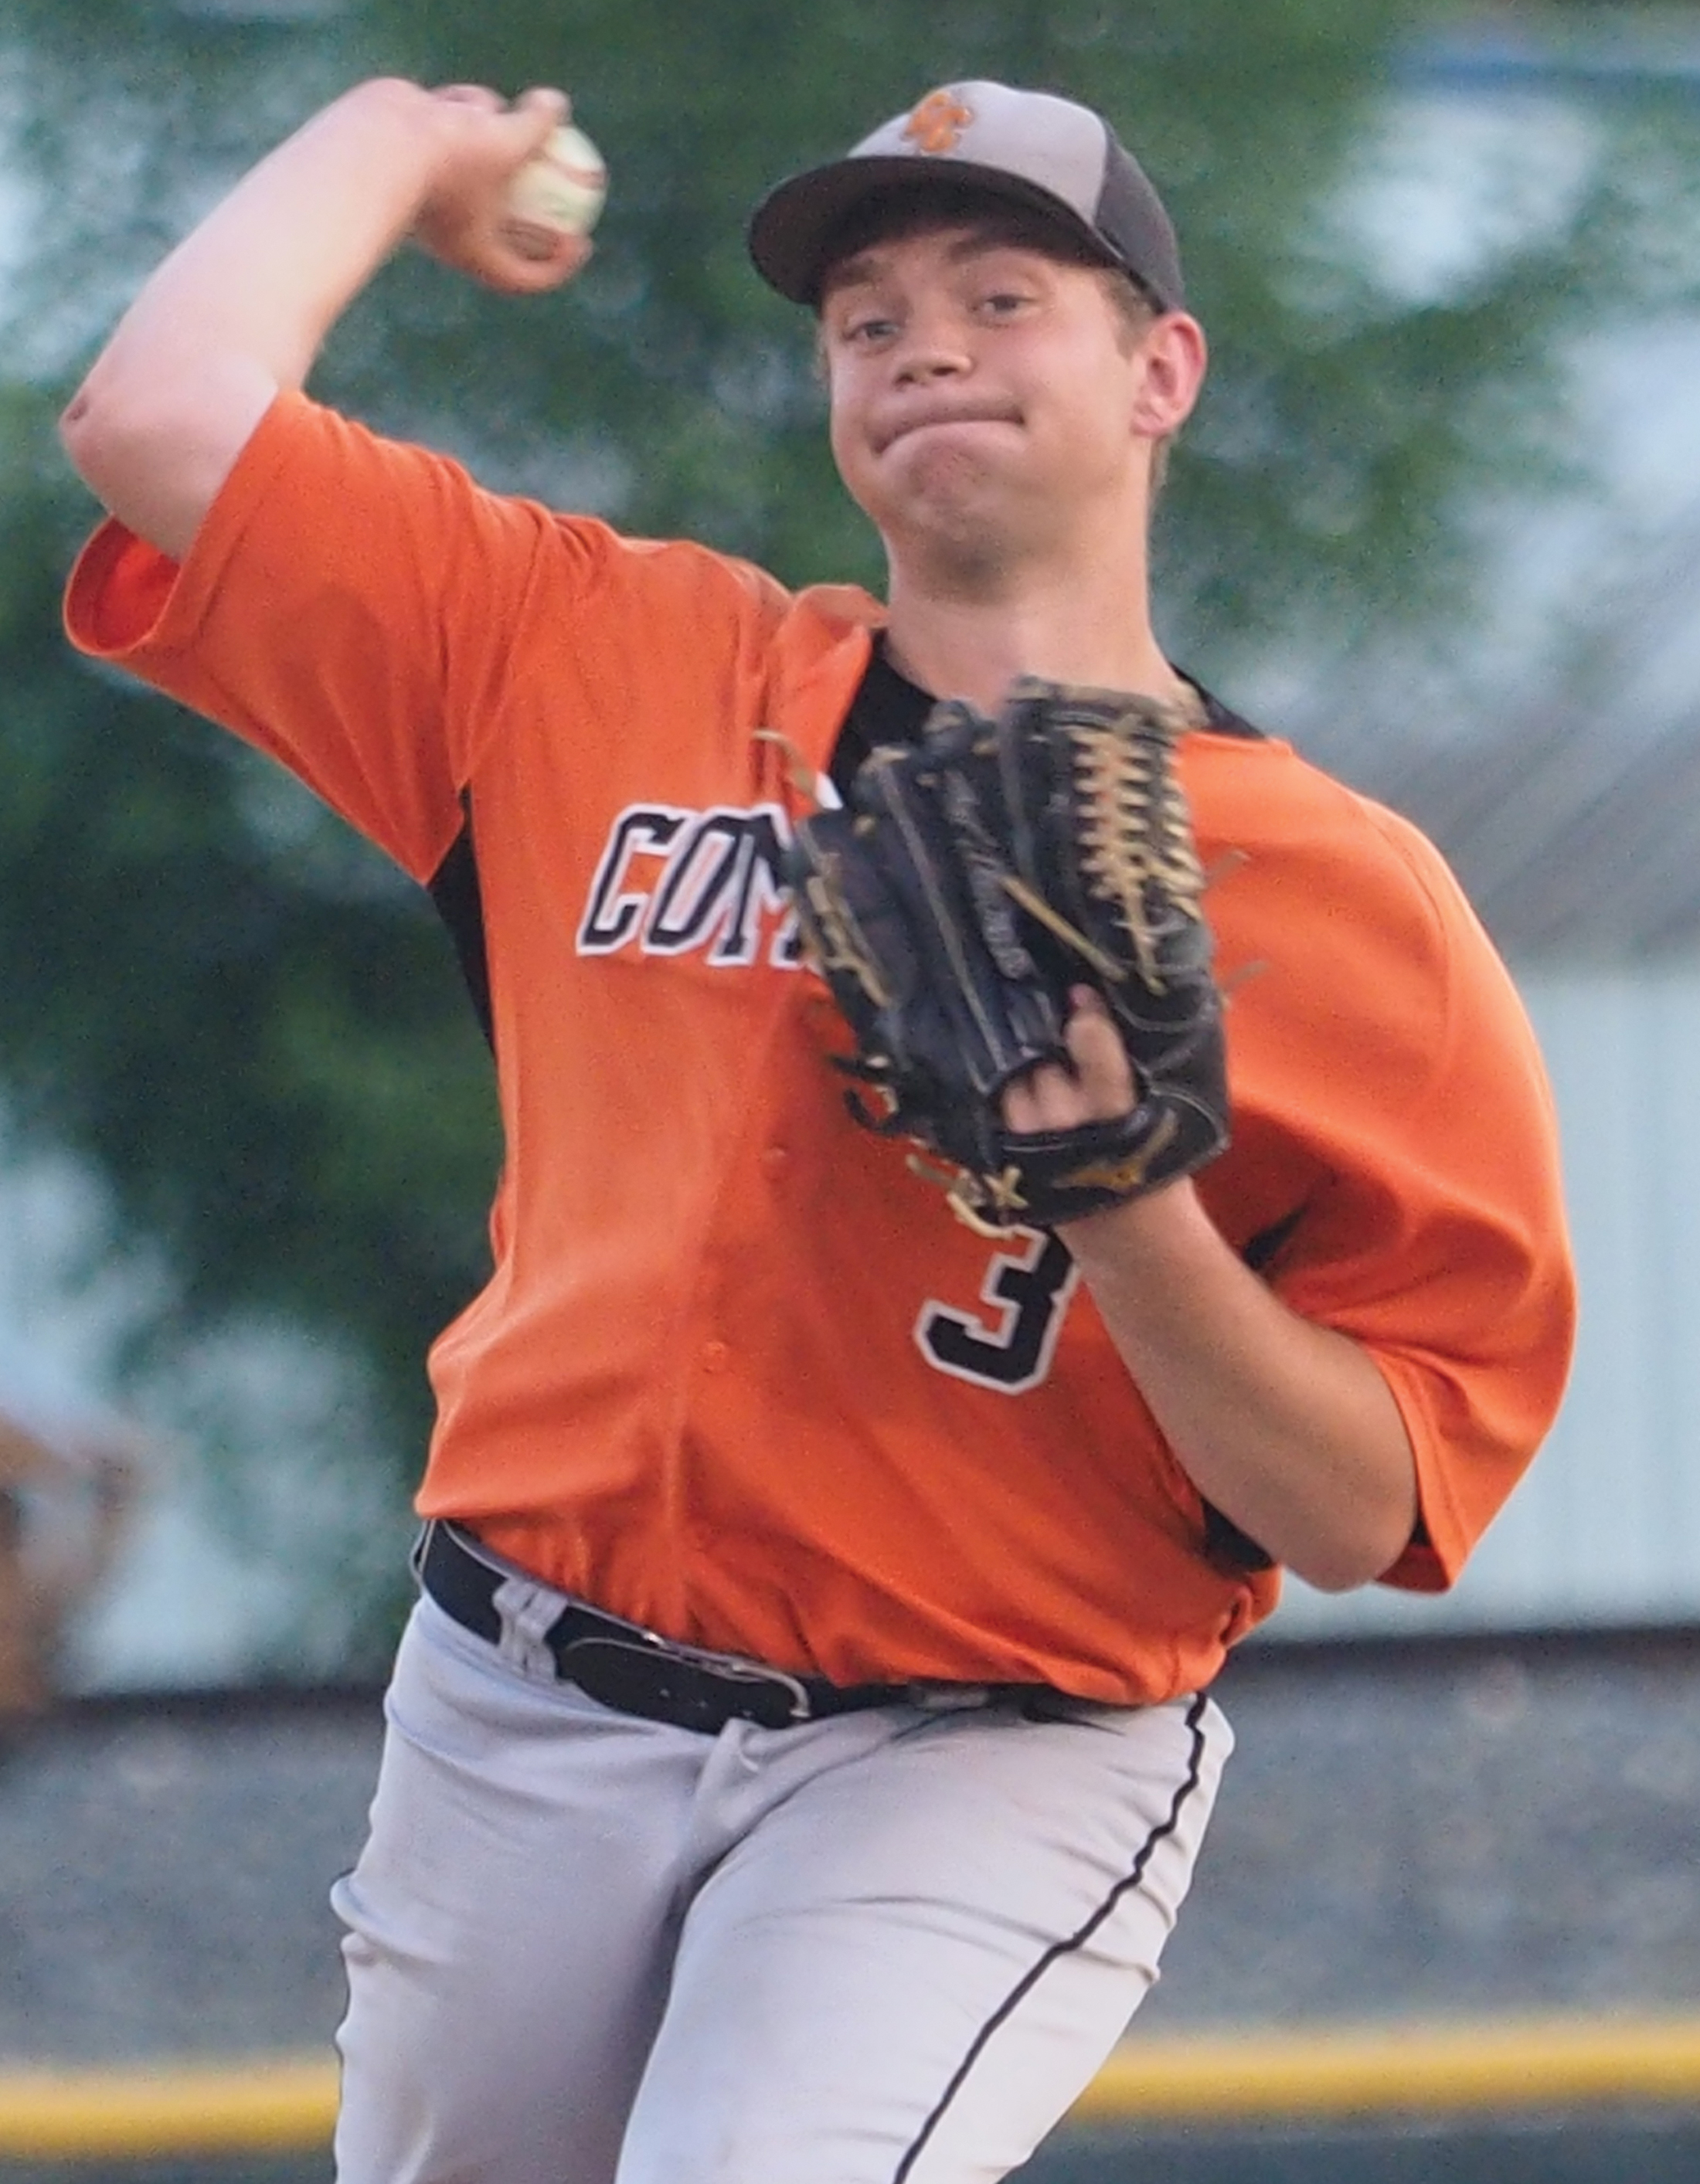 Johanningmeier pitches first shutout, Comets split DH with Huskies